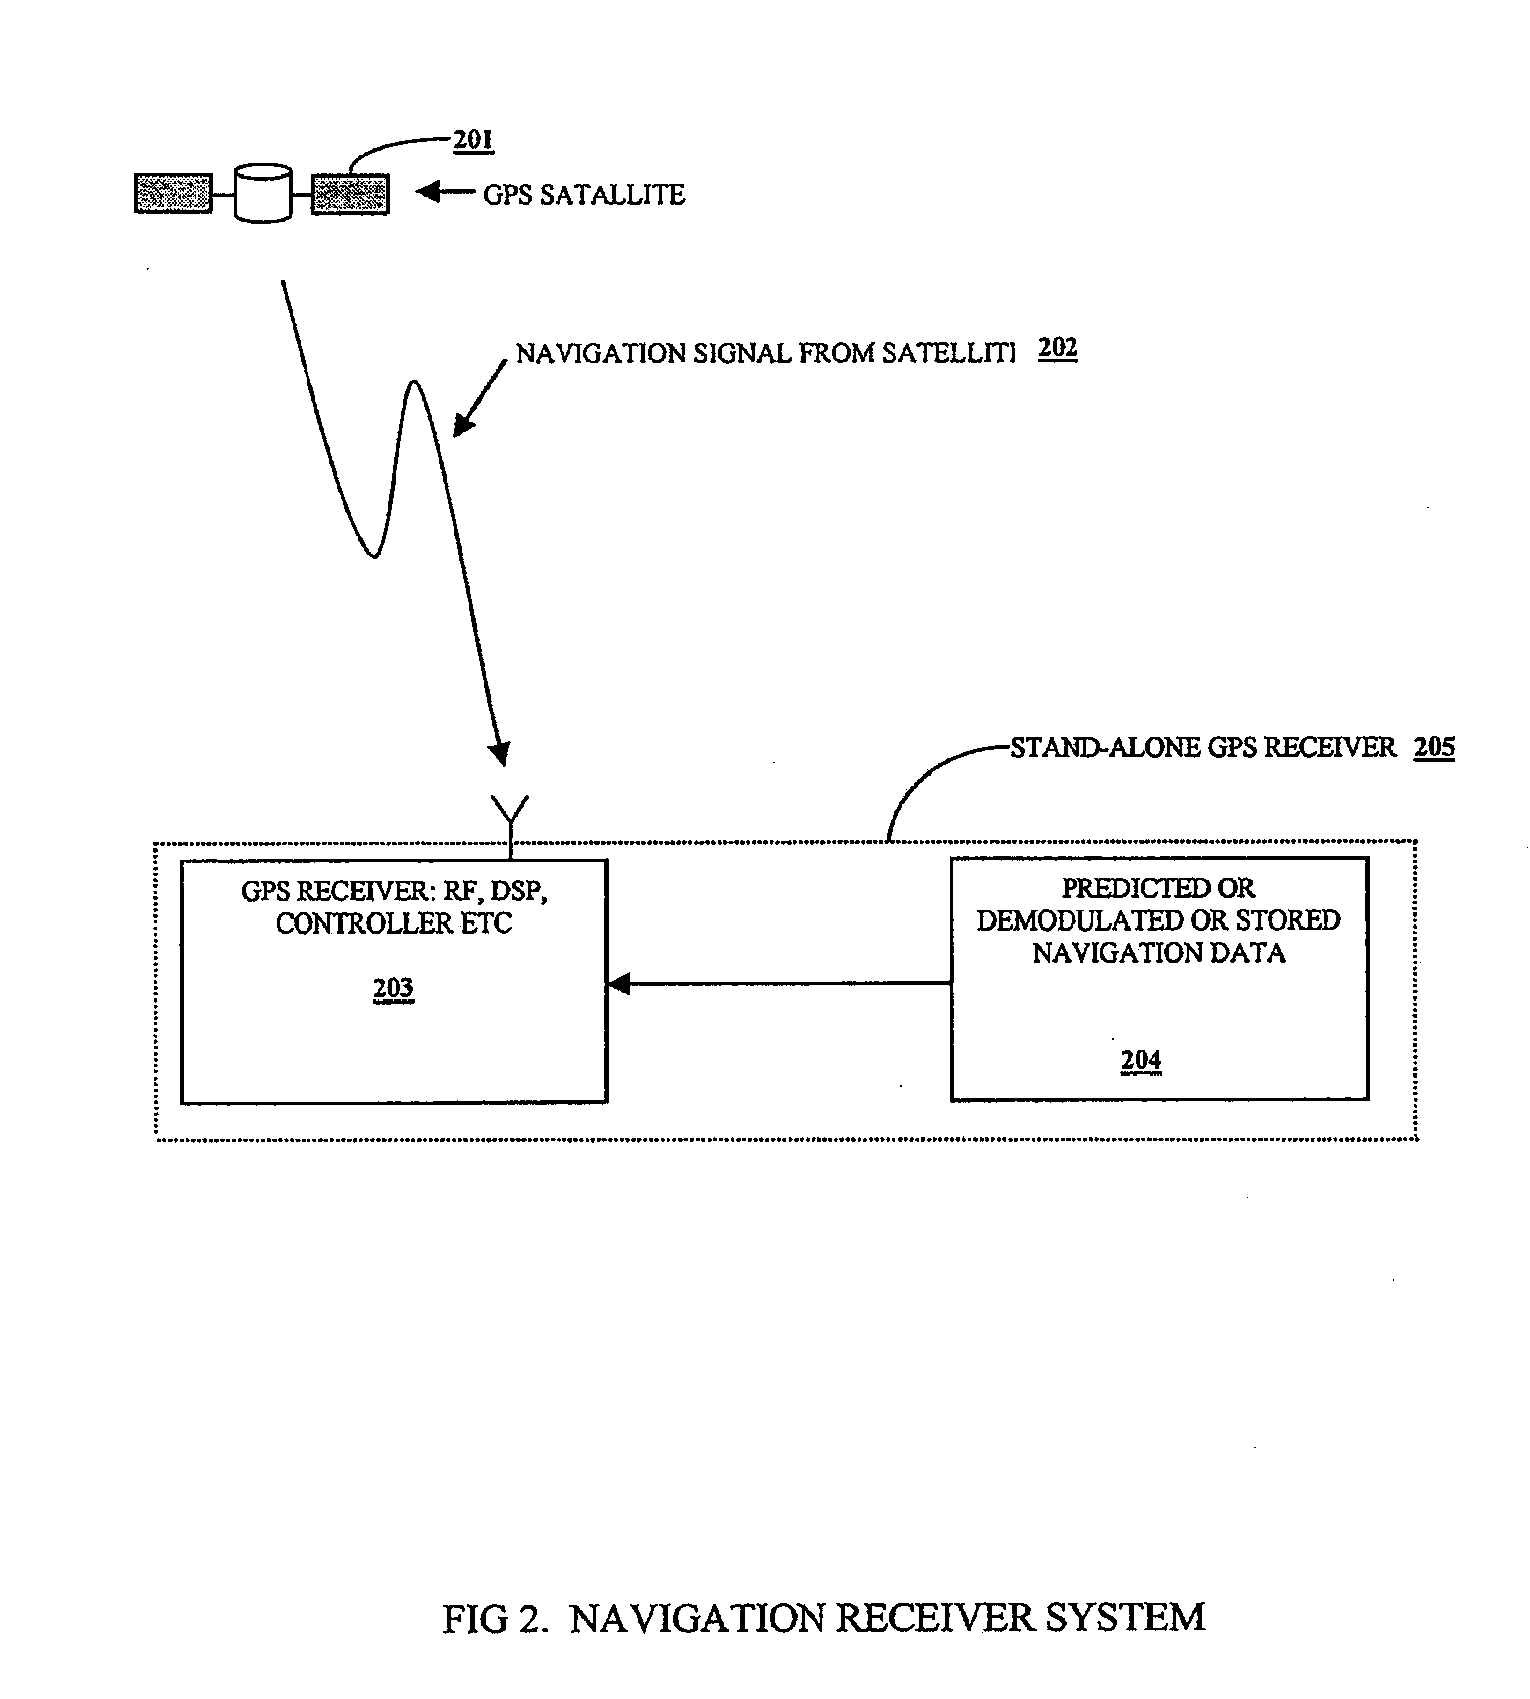 Method of mixed data assisted and non data assisted navigation signal acquisition, tracking and reacquisition